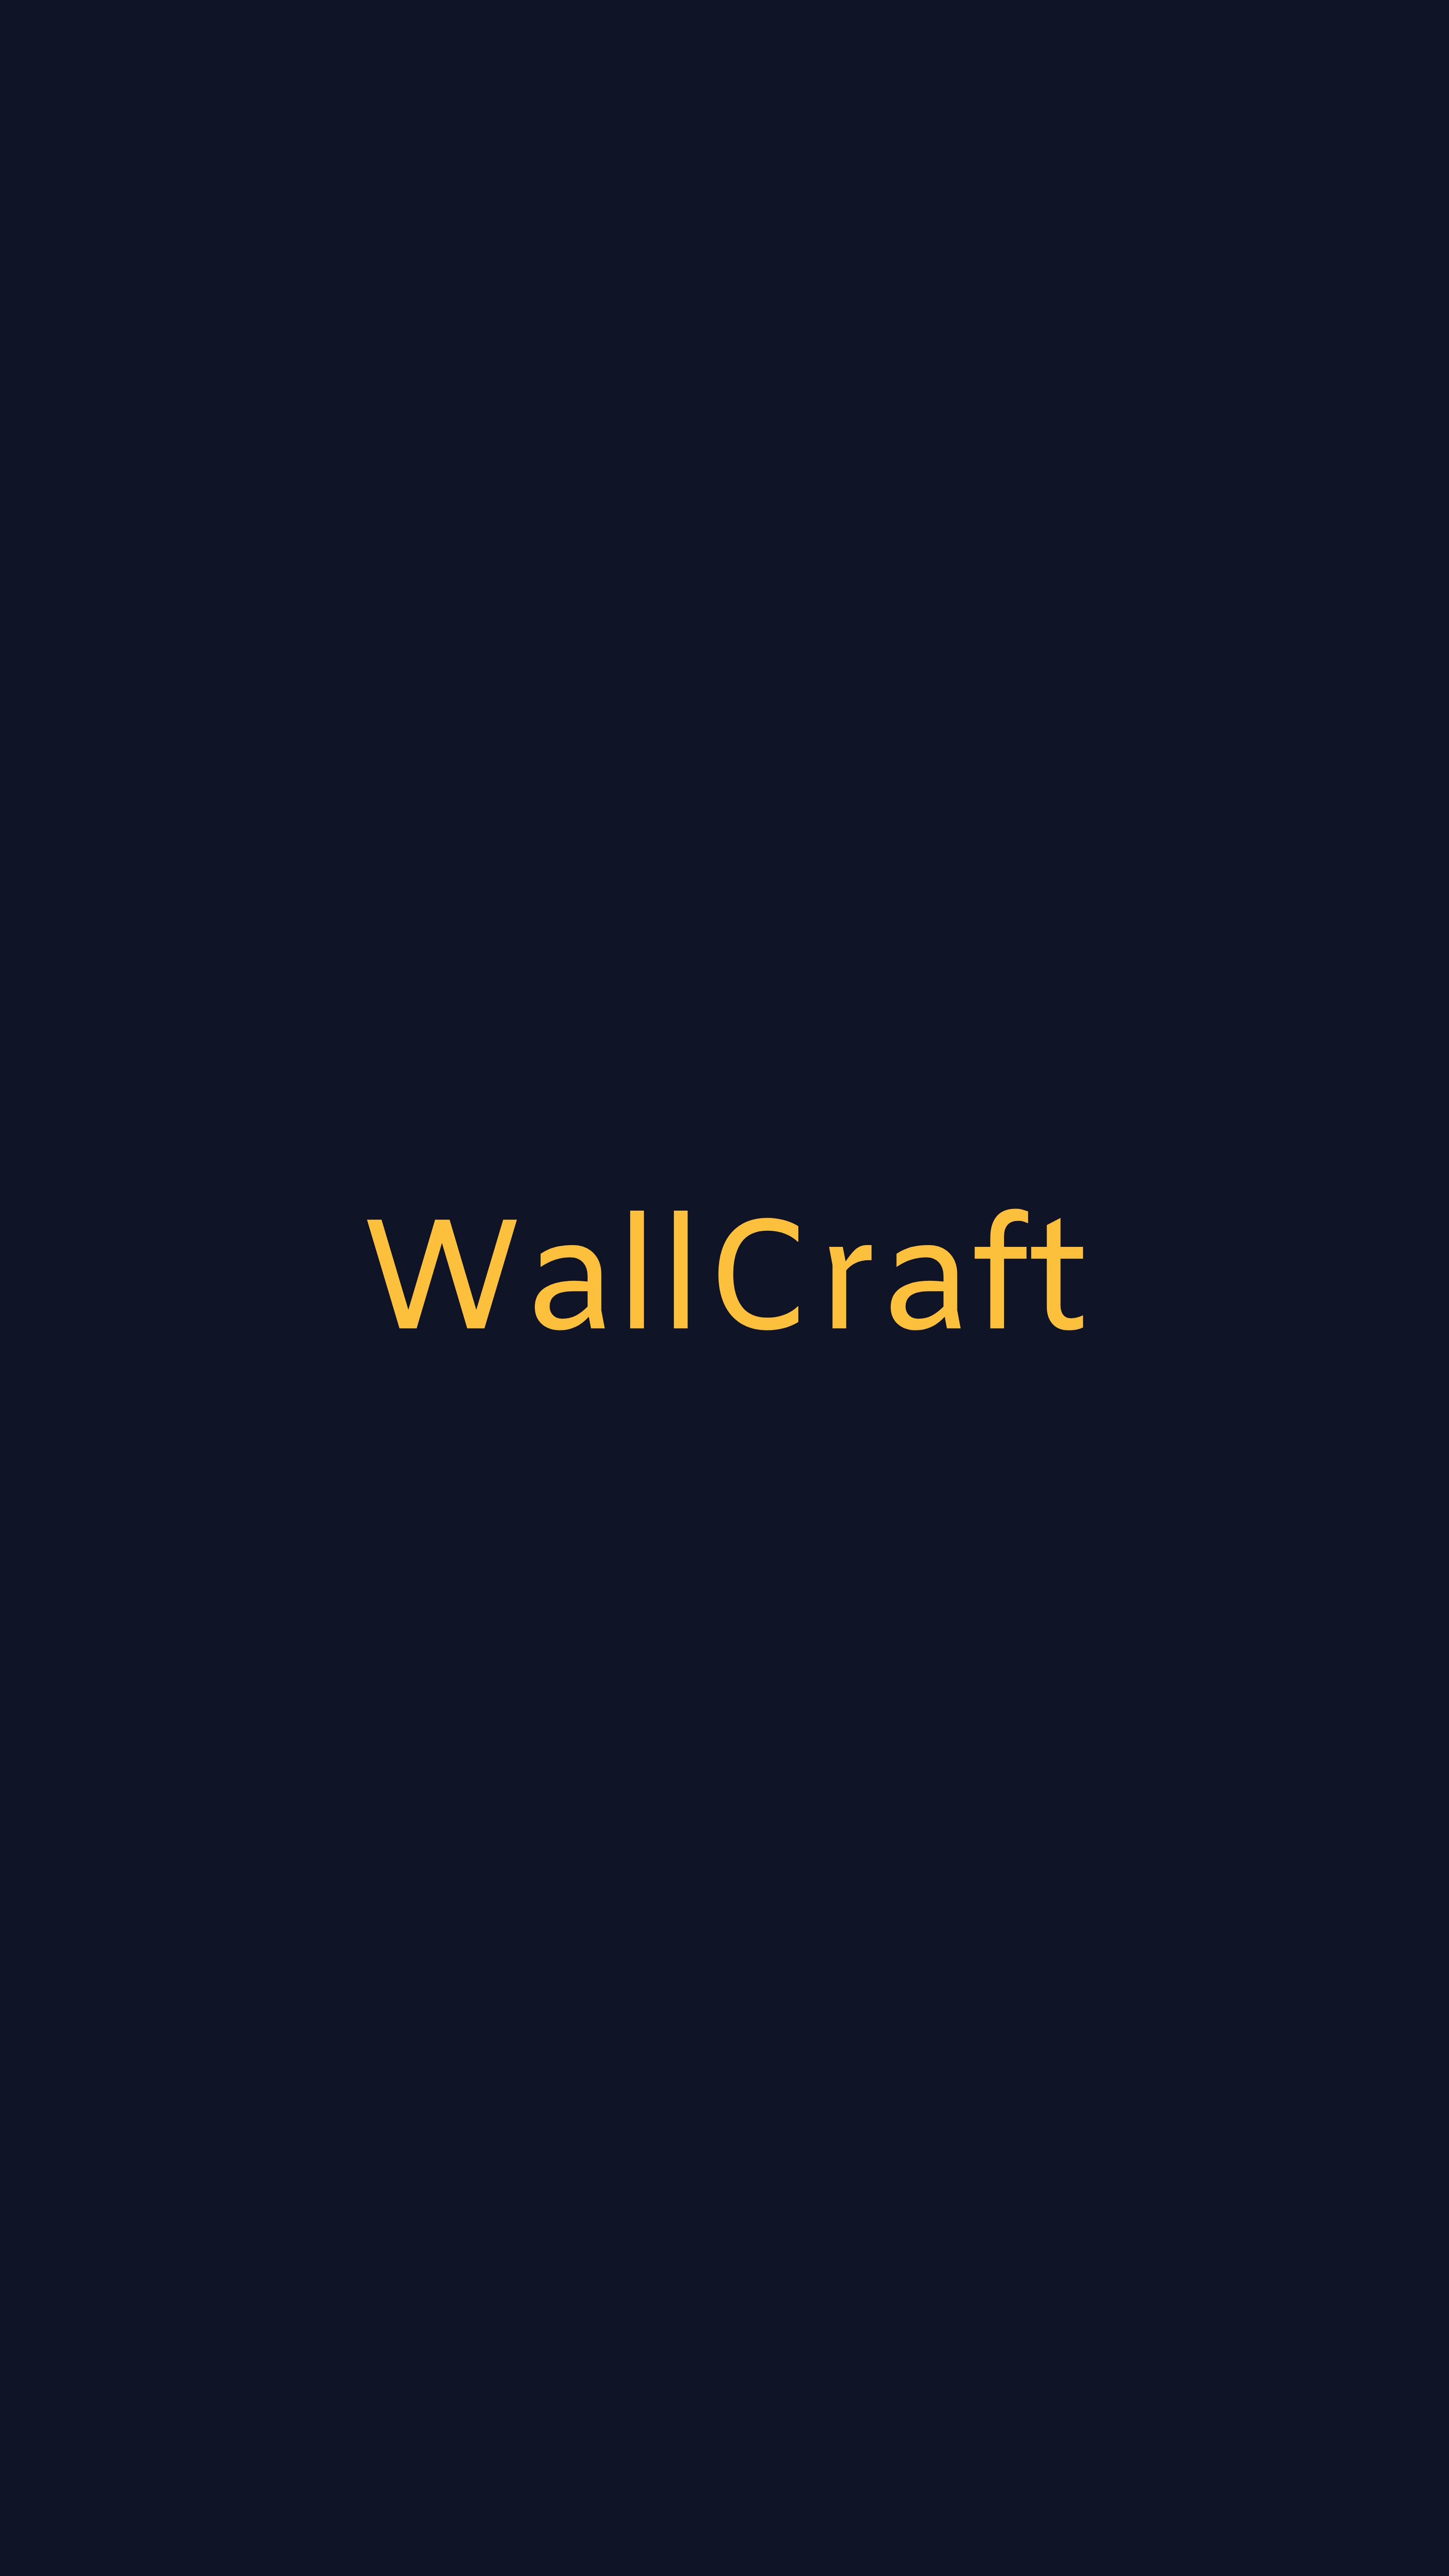 words, inscription, text, word, wallcraft, brand name, brand